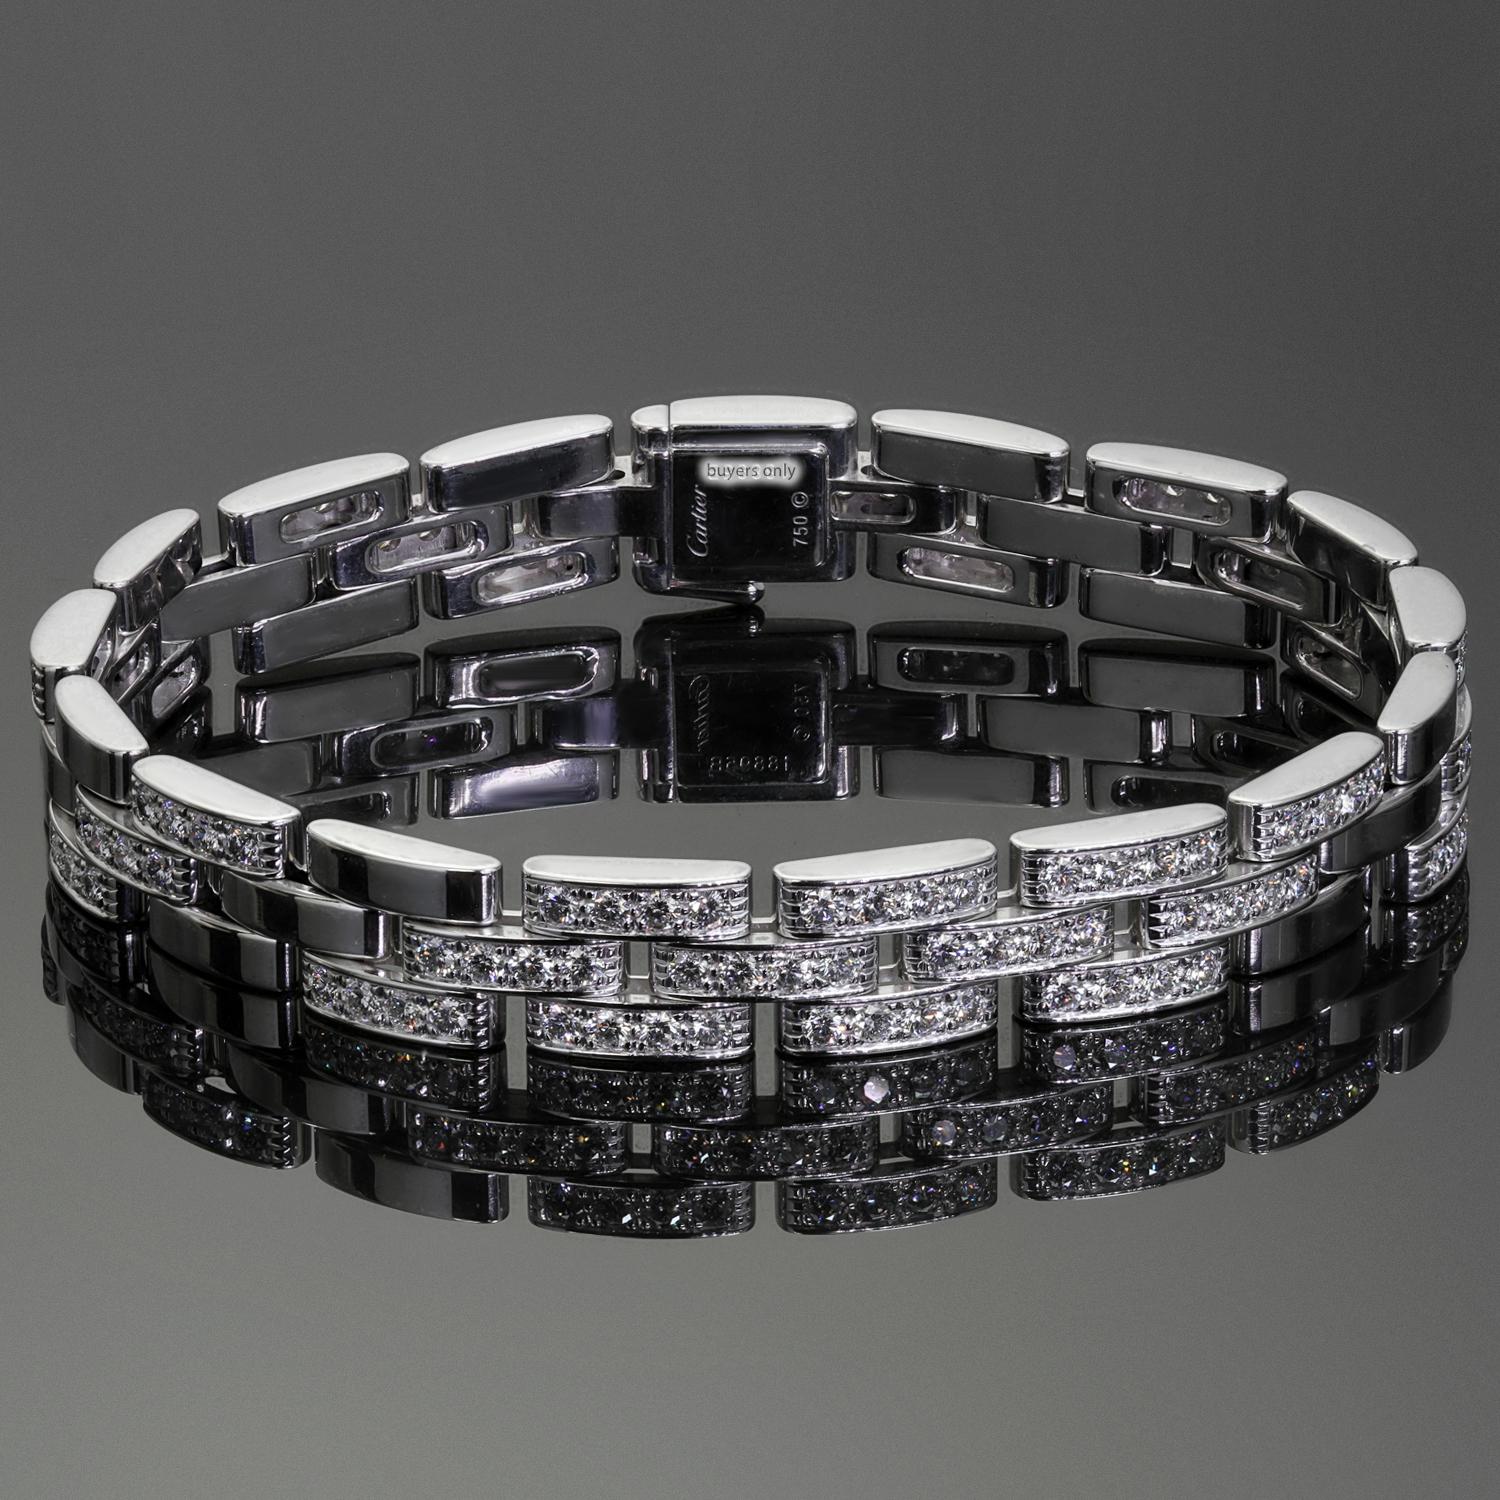 This classic Cartier bracelet from the iconic Maillon Panthere collection features 3 rows of rectangular links crafted in 18k white gold and set with 120 brilliant-cut round D-E-F VVS1-VVS2 diamonds weighing an estimated 5.00 carats. Made in France